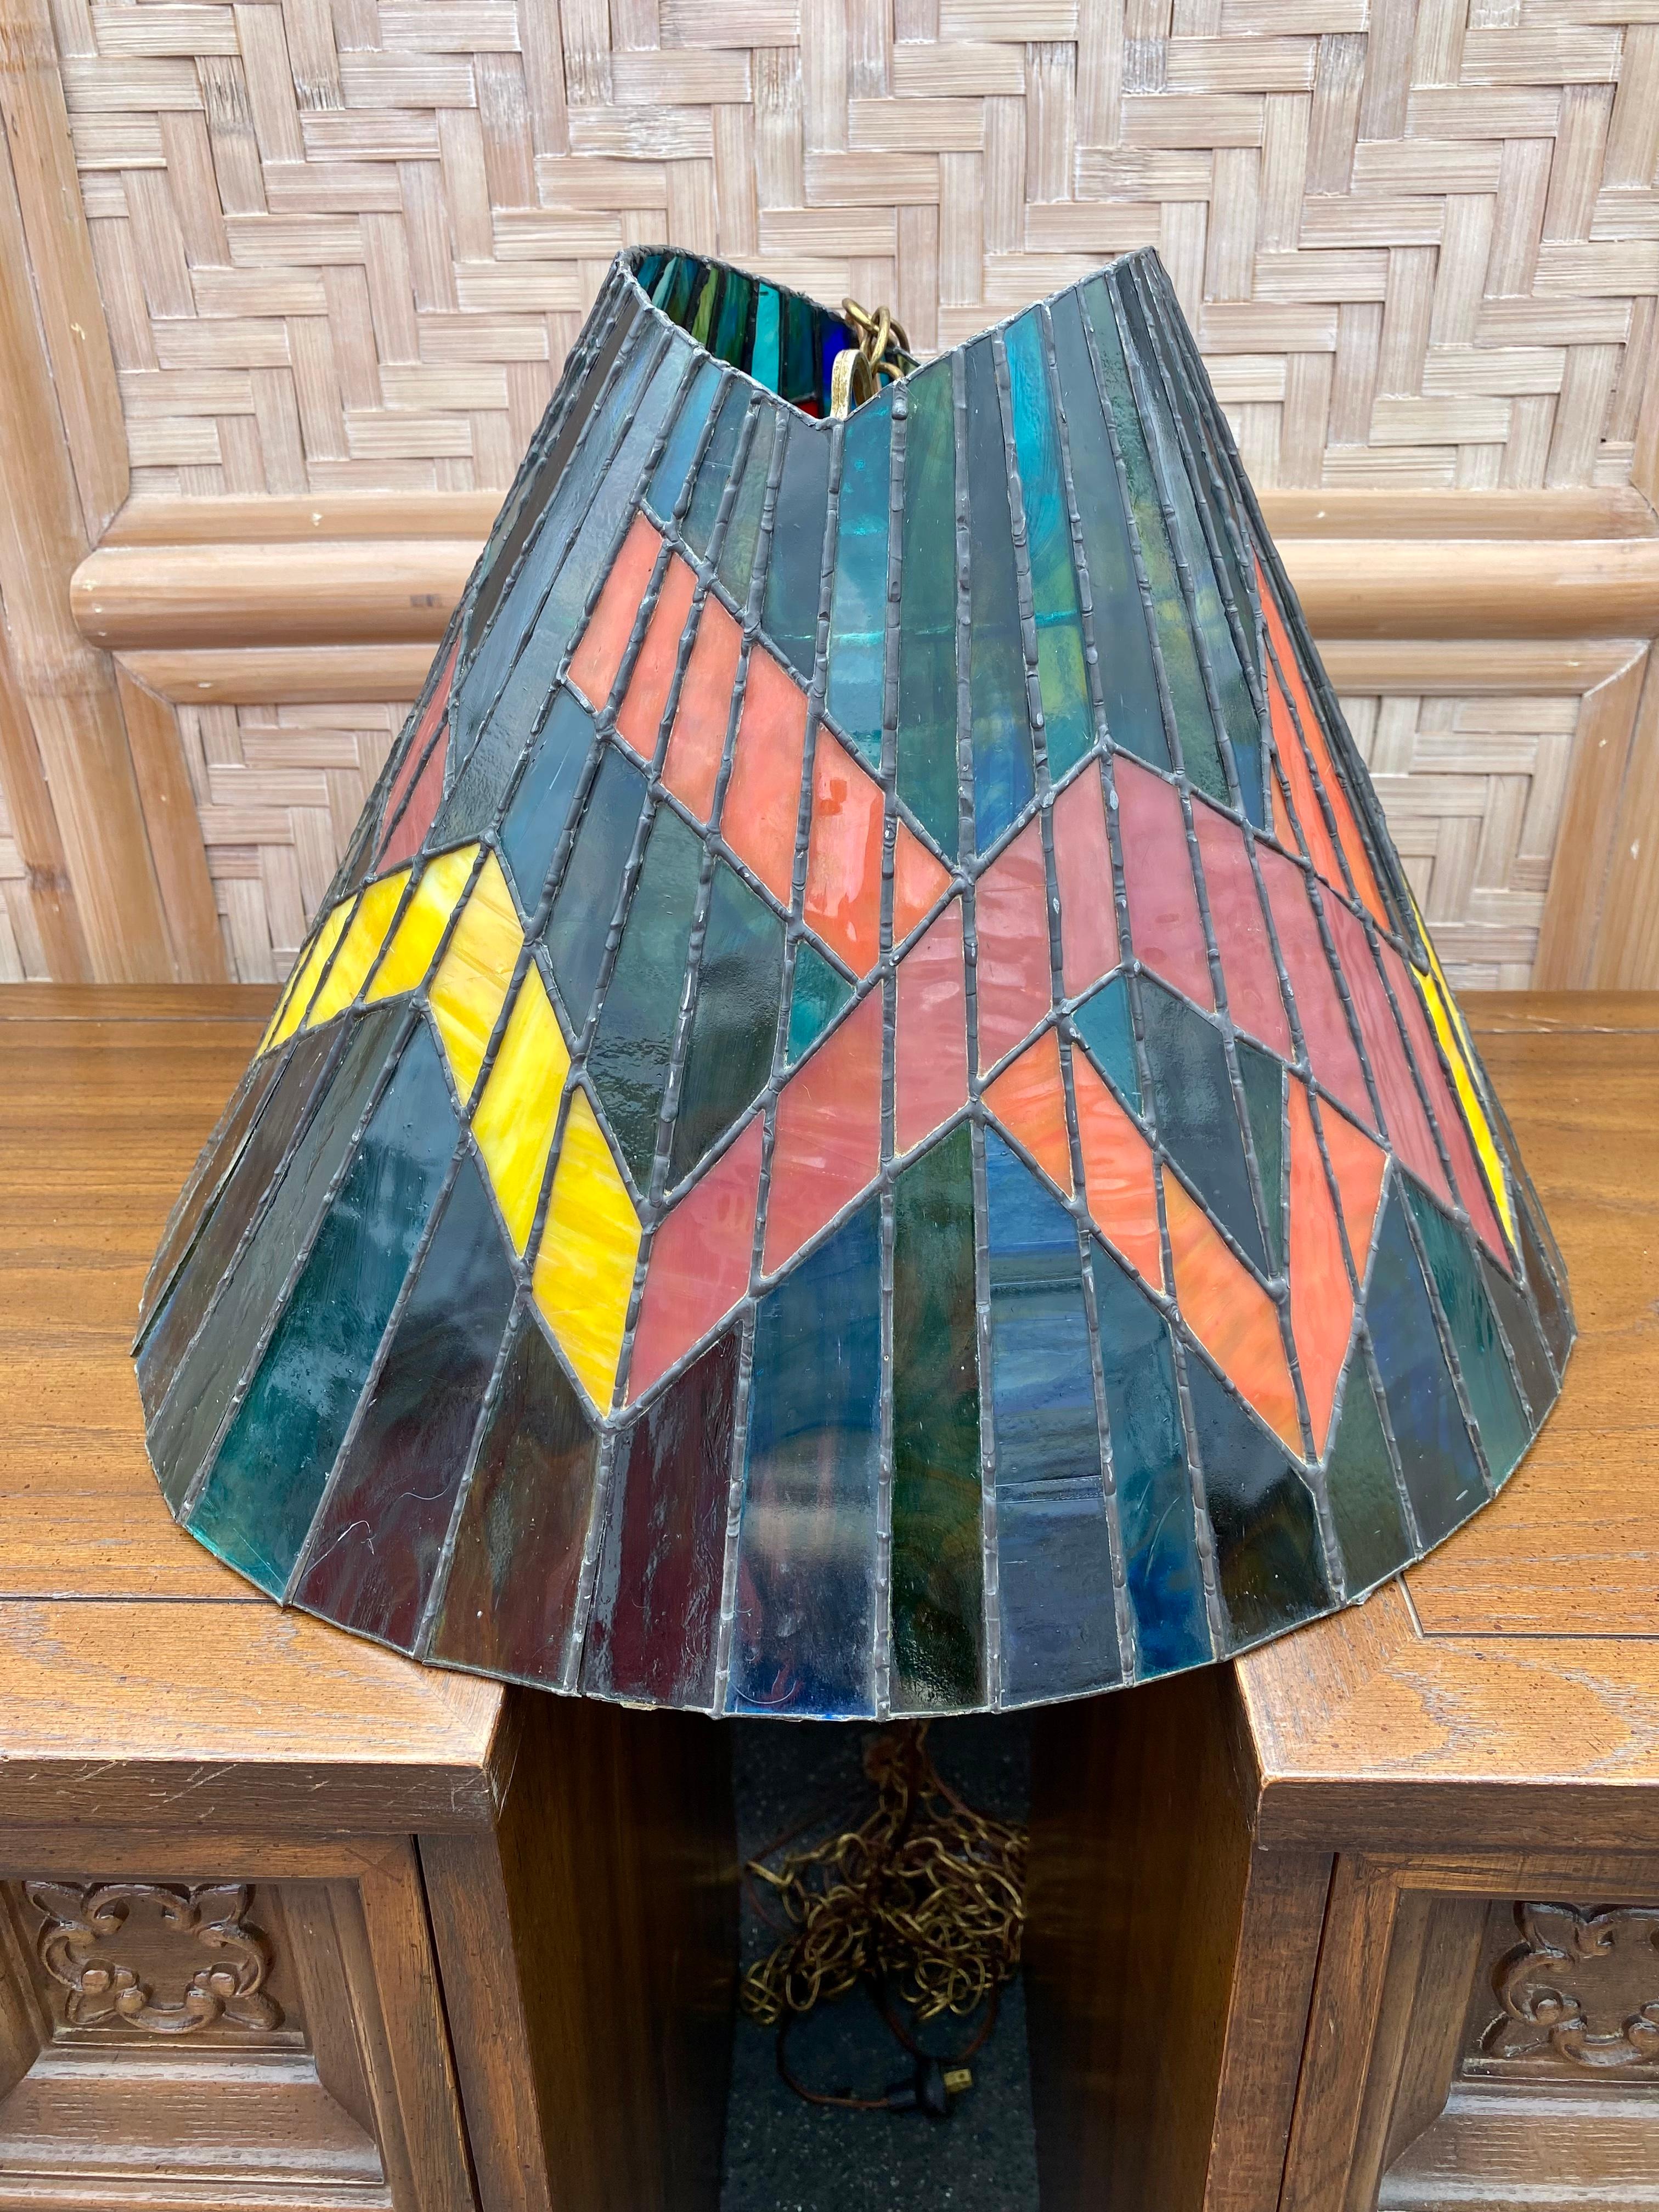 On offer on this occasion is one of the most stunning and rare glass hanging lamp you could hope to find. Outstanding design is exhibited throughout. The beautiful set is statement piece and packed with personality!  Just look at the gorgeous